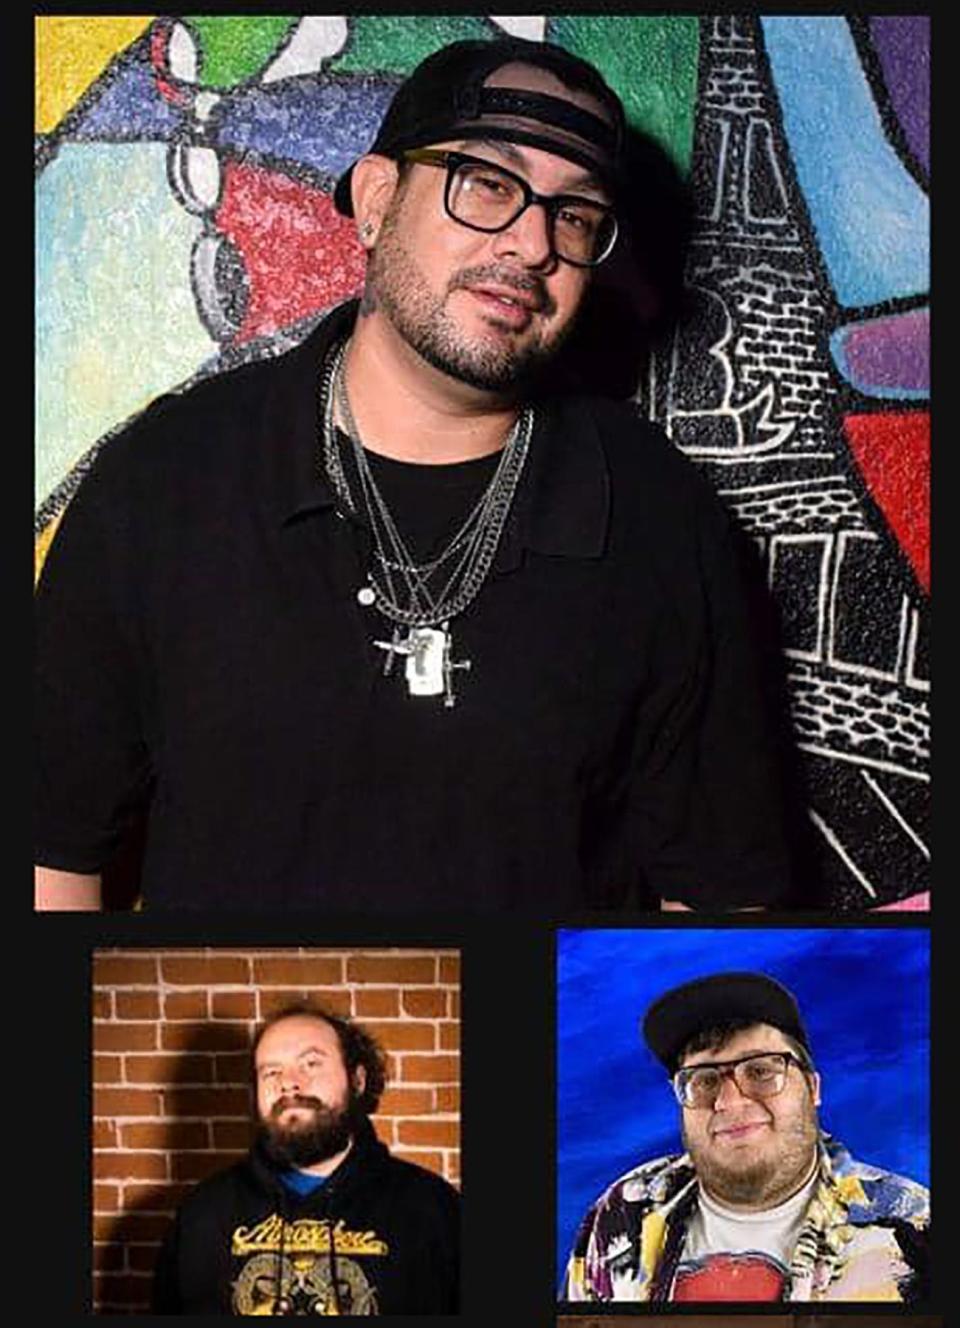 Comedians Ricky Ramos (top) Dylan Kantor (bottom left) and Darron Finesilver are set to serve up some laughs May 11 at the Blue Cactus Room at El Nopal in Pueblo.